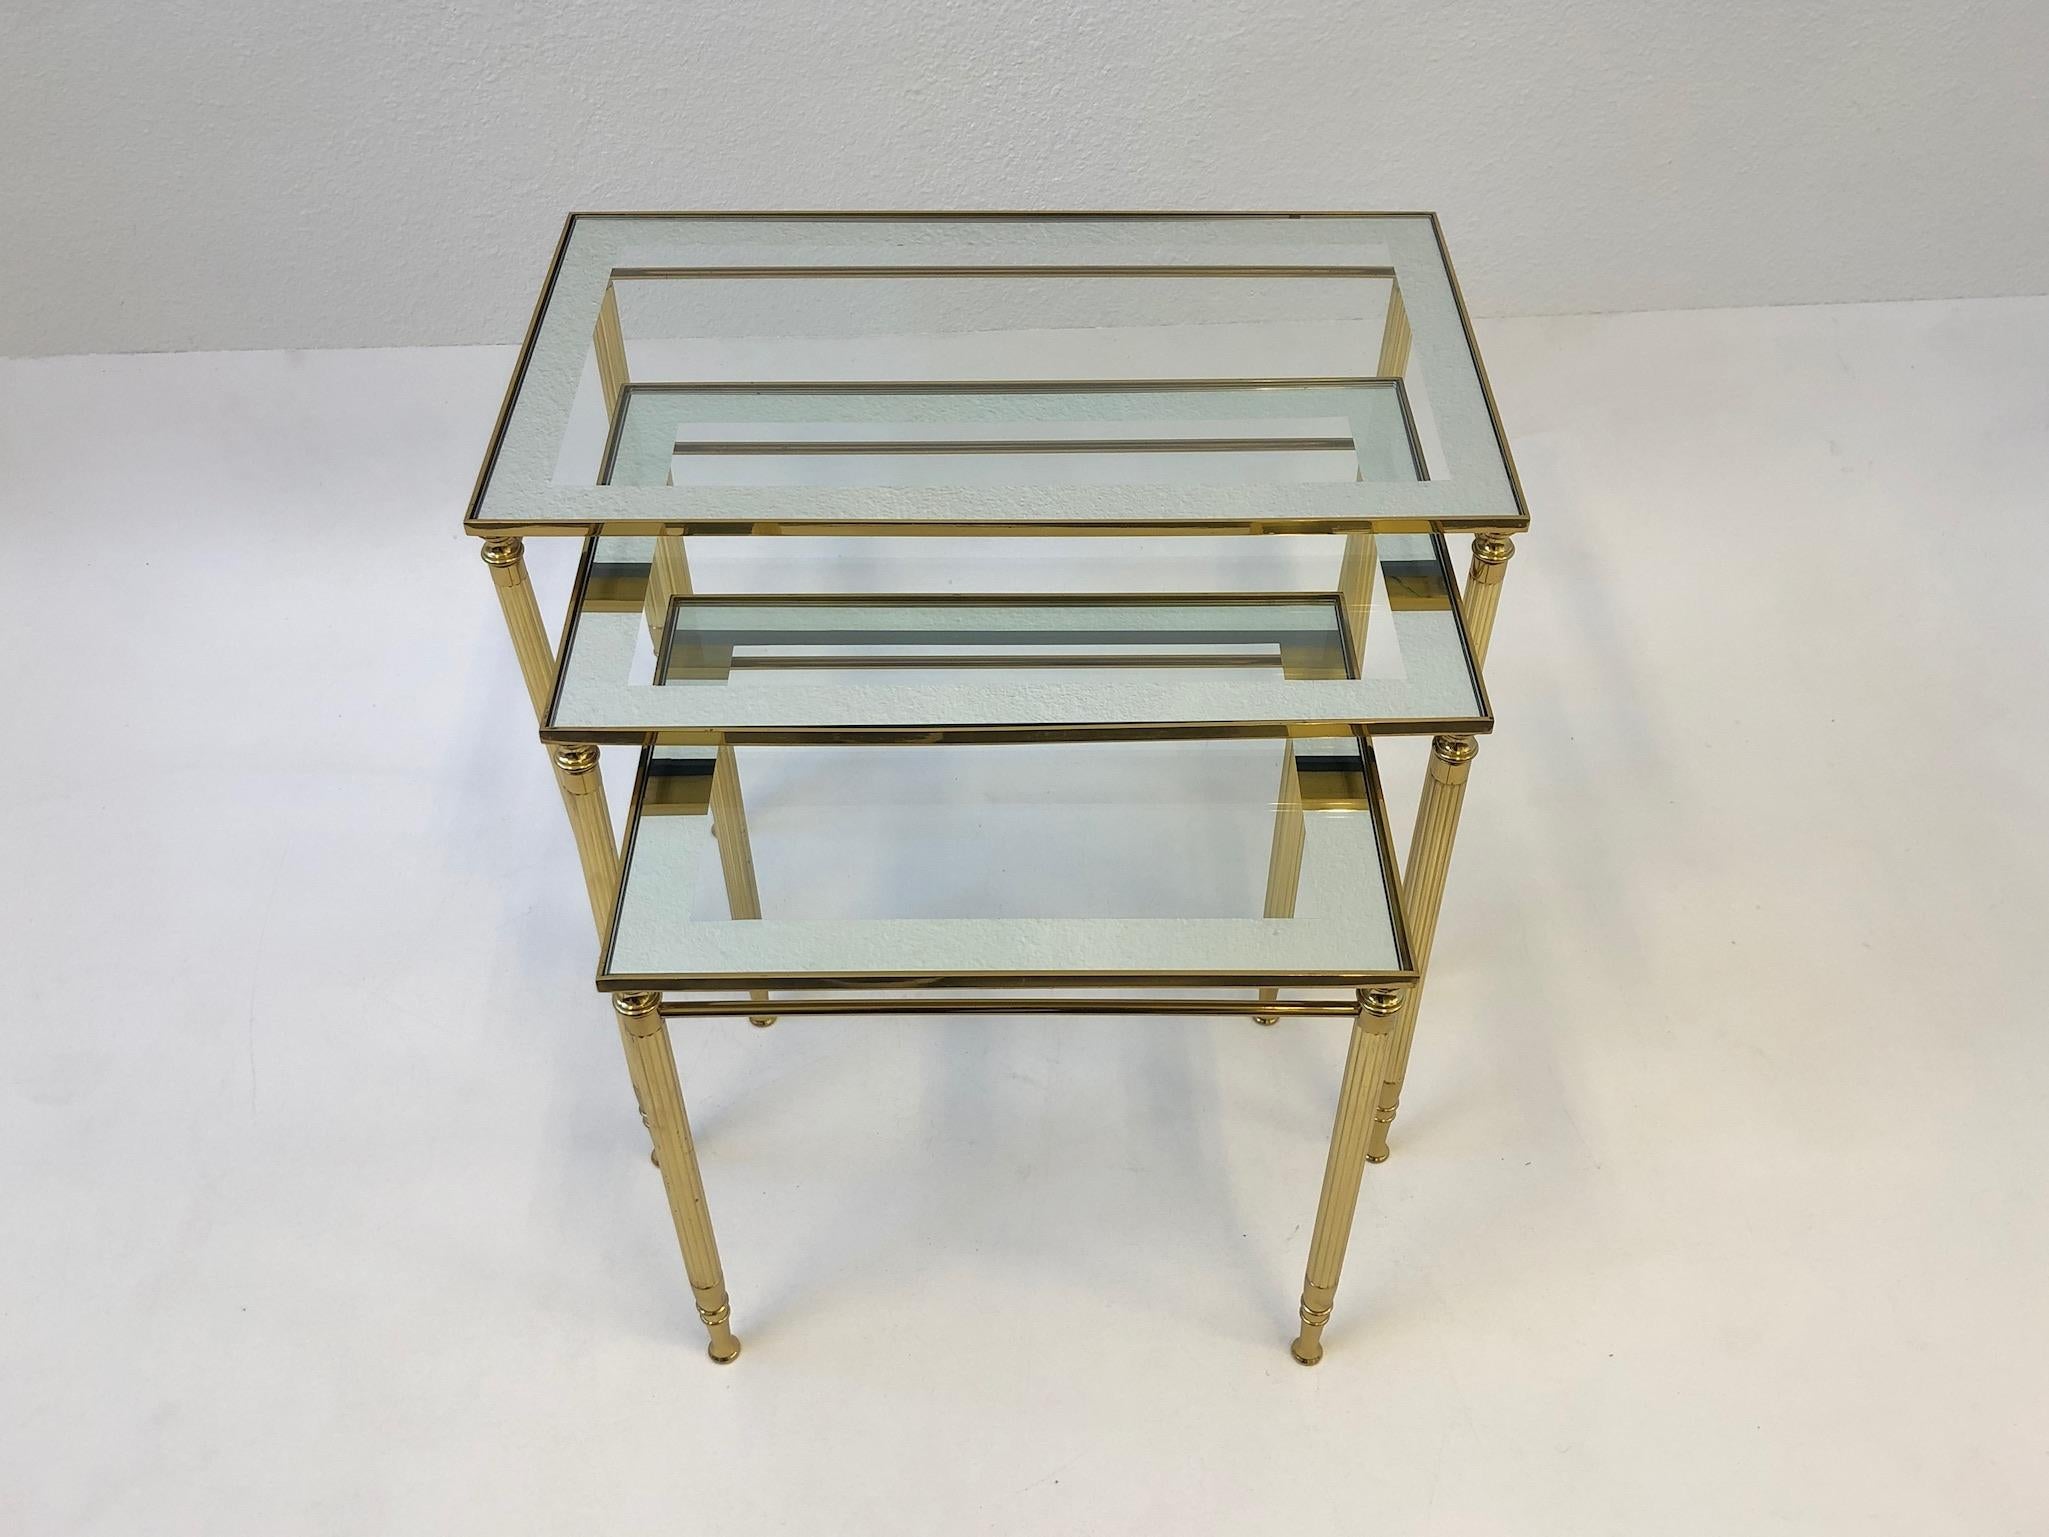 Glamorous 1970s set of three Italian brass and mirror frame glass tops nesting tables by Maison Baguès. The tables are constructed of solid brass with mirror frame glass tops. They are in original condition, so they show minor wear consistent with